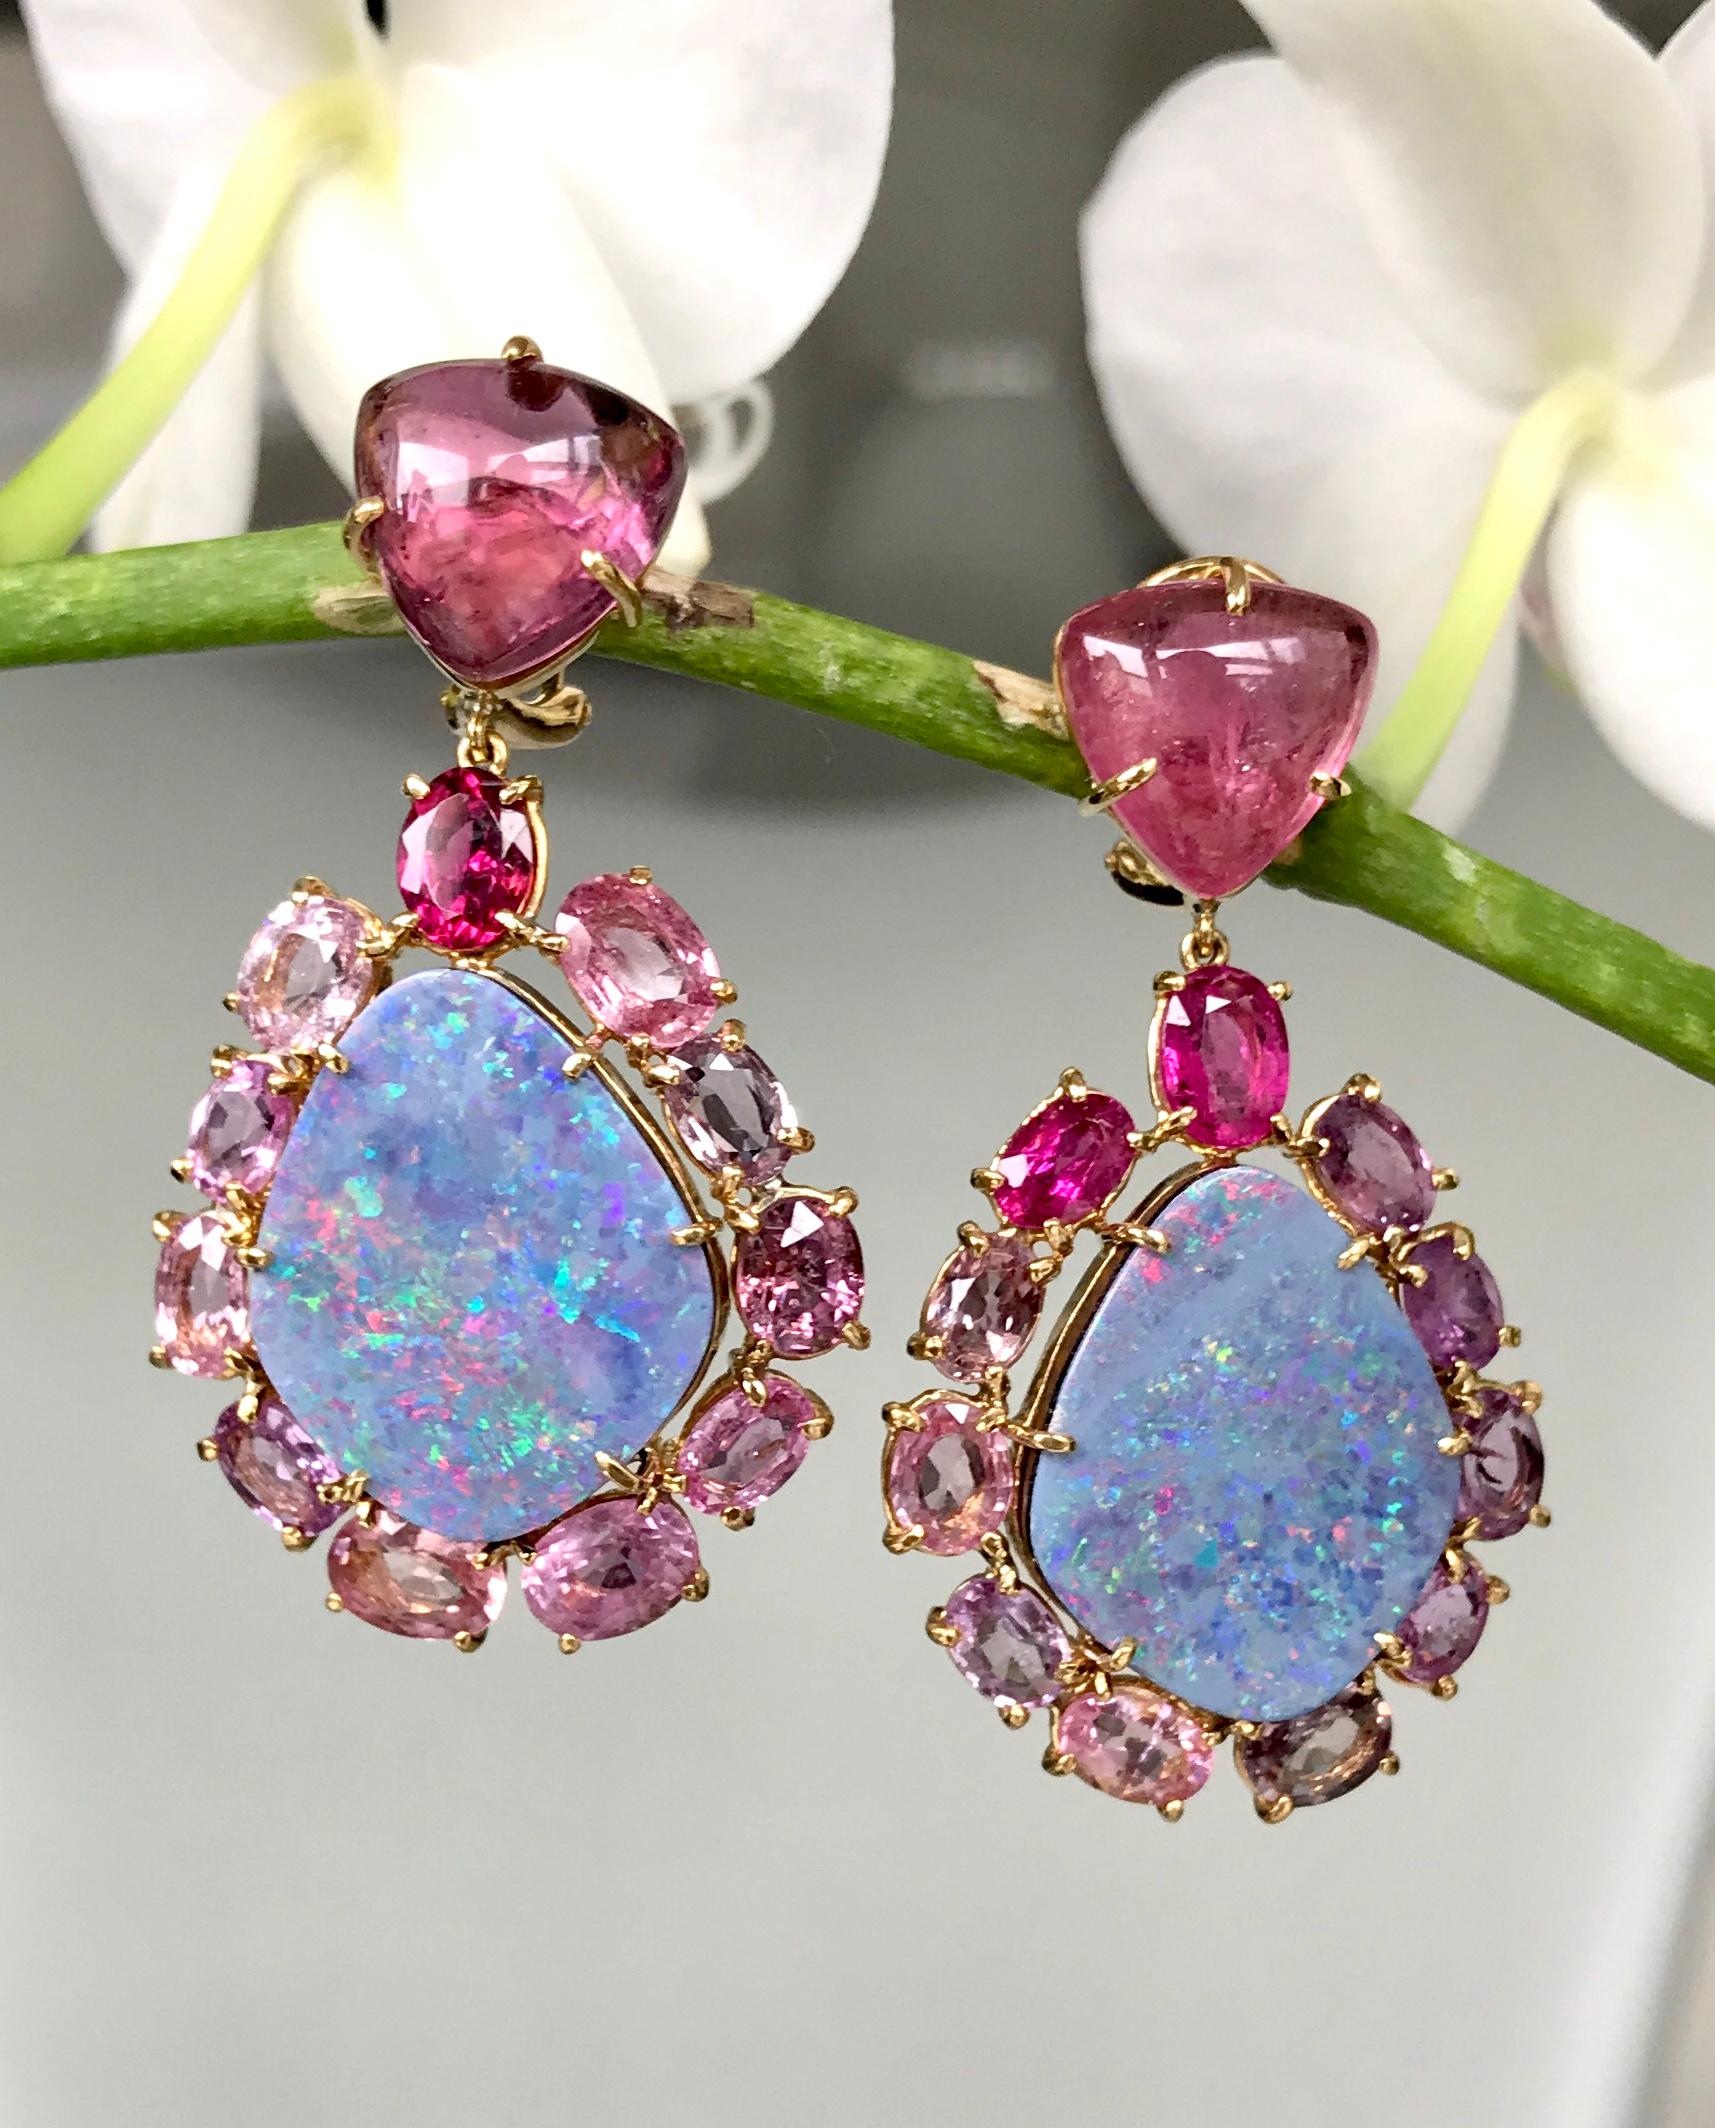 Australian boulder opals encircled by sparkling, faceted pink sapphires with a luminous cabochon pink tourmaline on top, handcrafted in 18 karat yellow gold. 

Iridescent Australian boulder opals are encircled by a symphony of rich, multi-hued pink